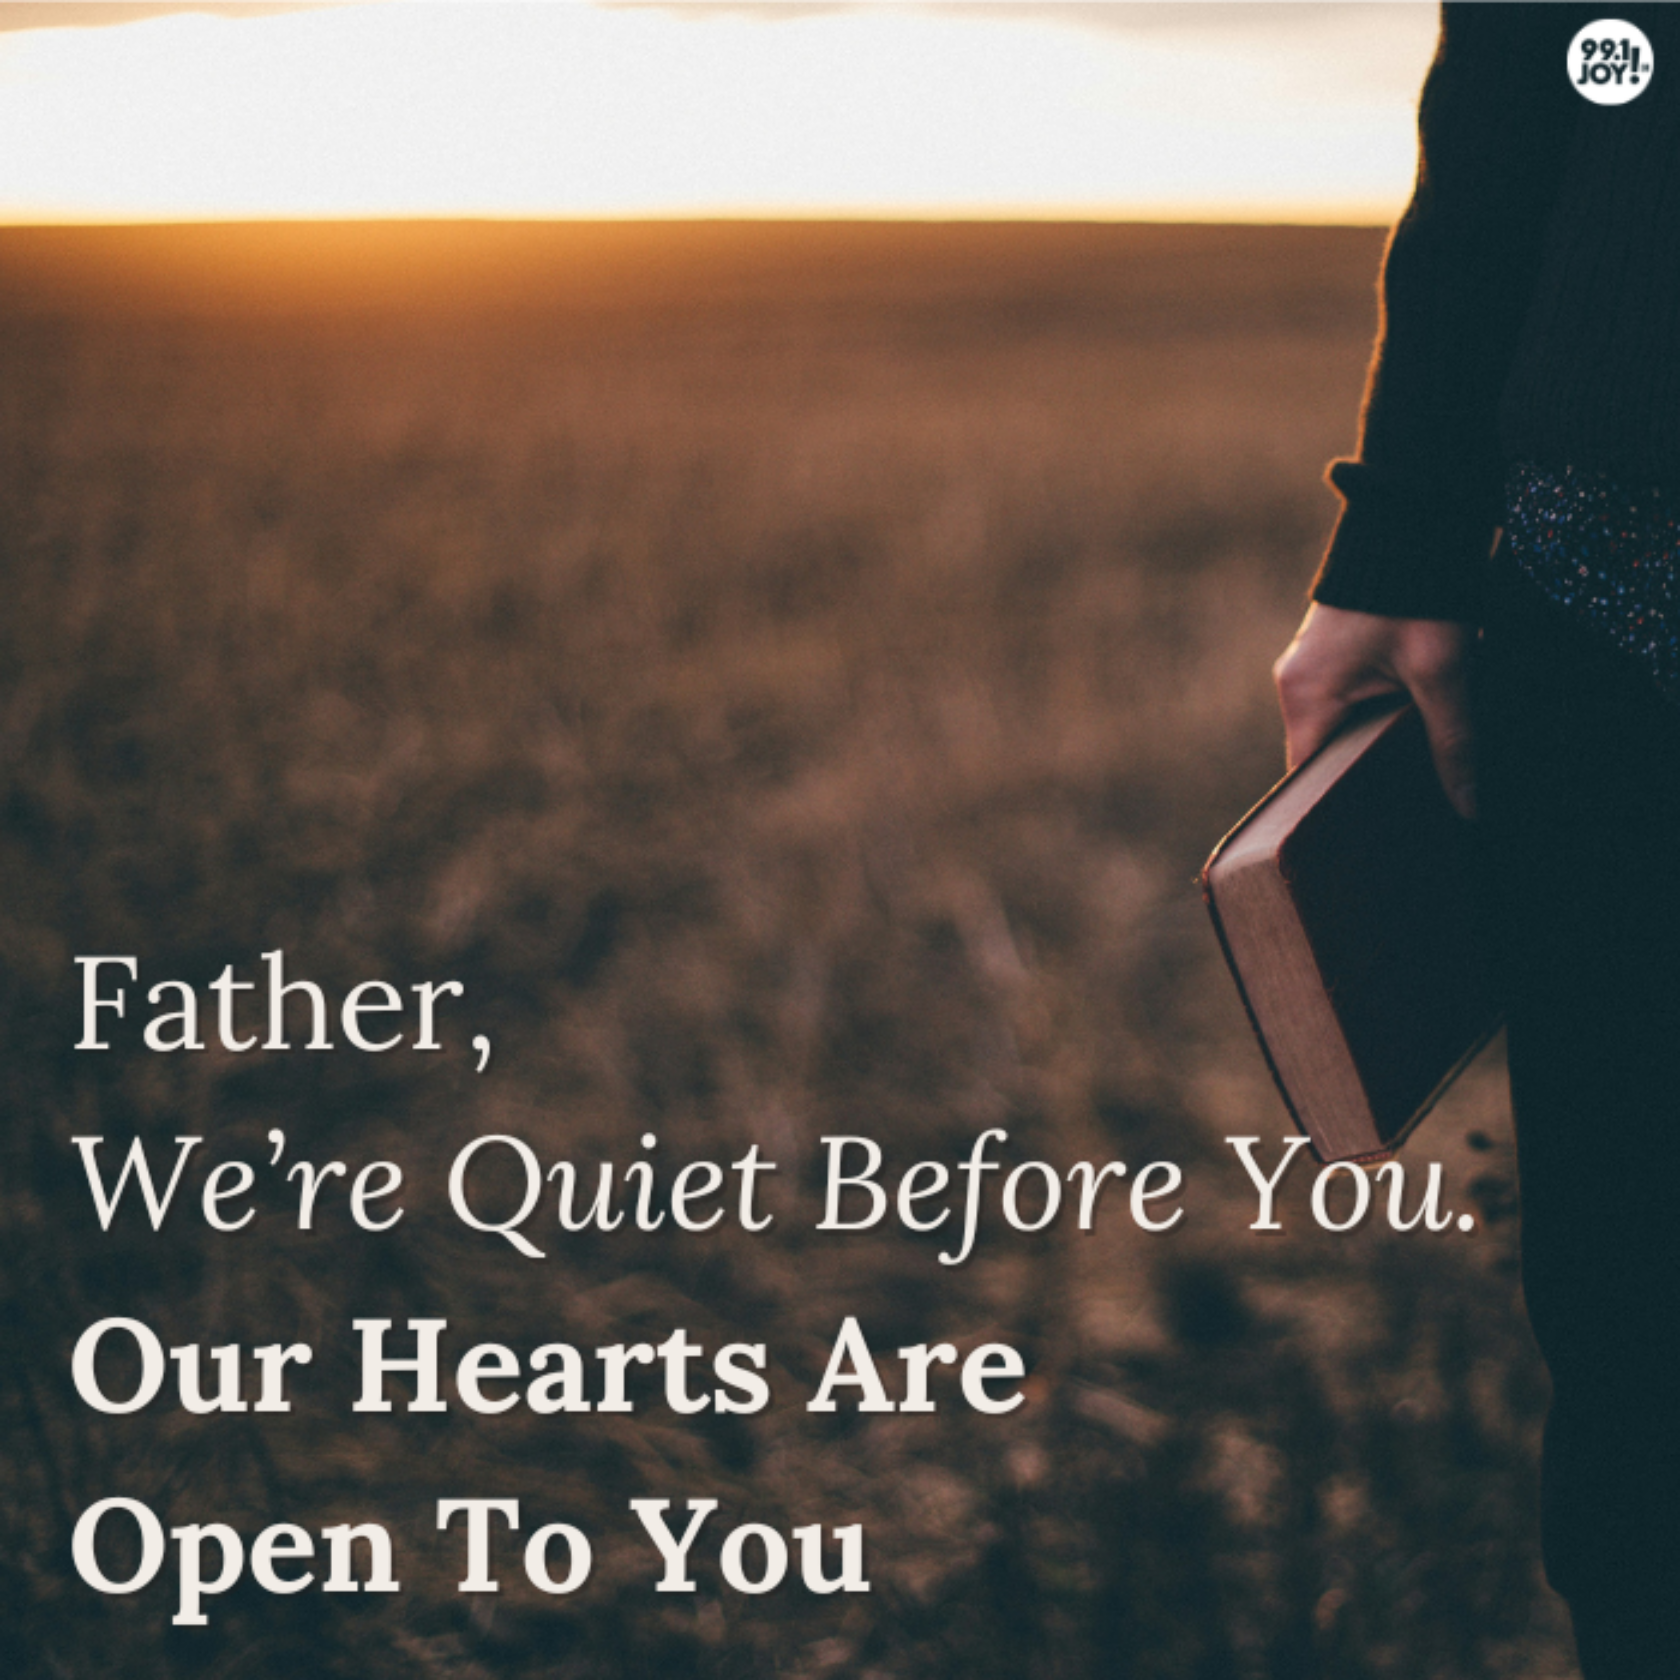 Father, We’re Quiet Before You. Our Hearts Are Open To You